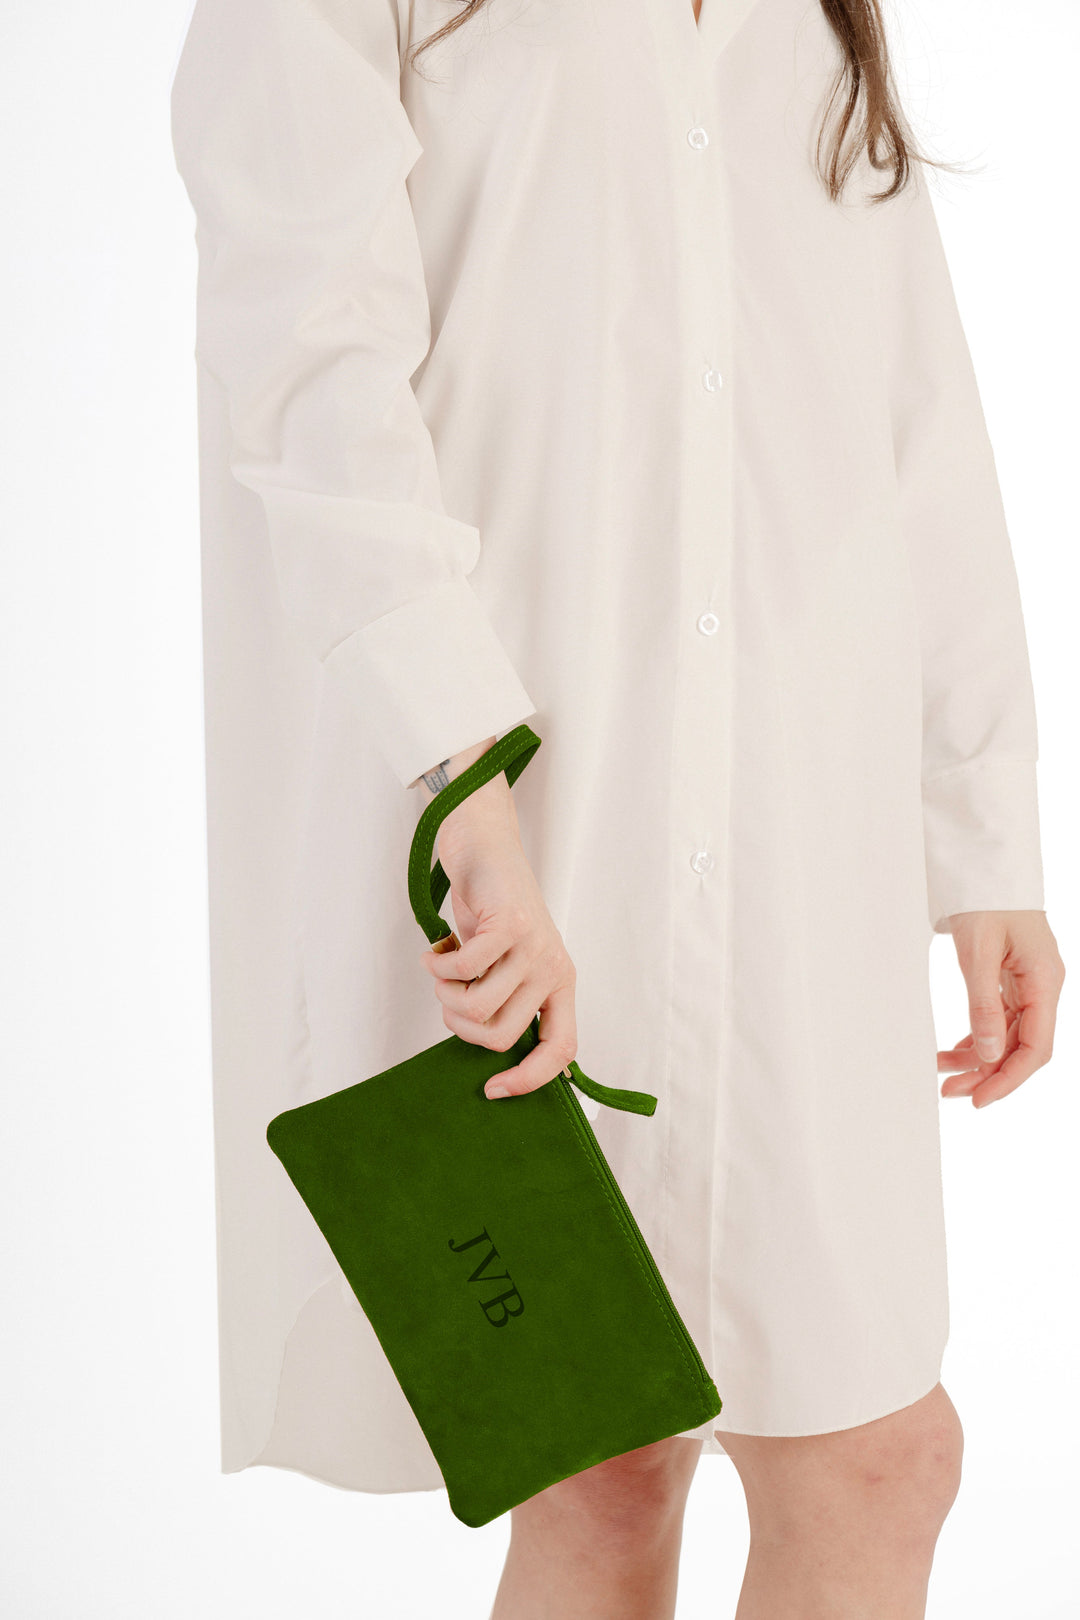 Person holding a green suede clutch with monogram JVB wearing a white button-up shirt